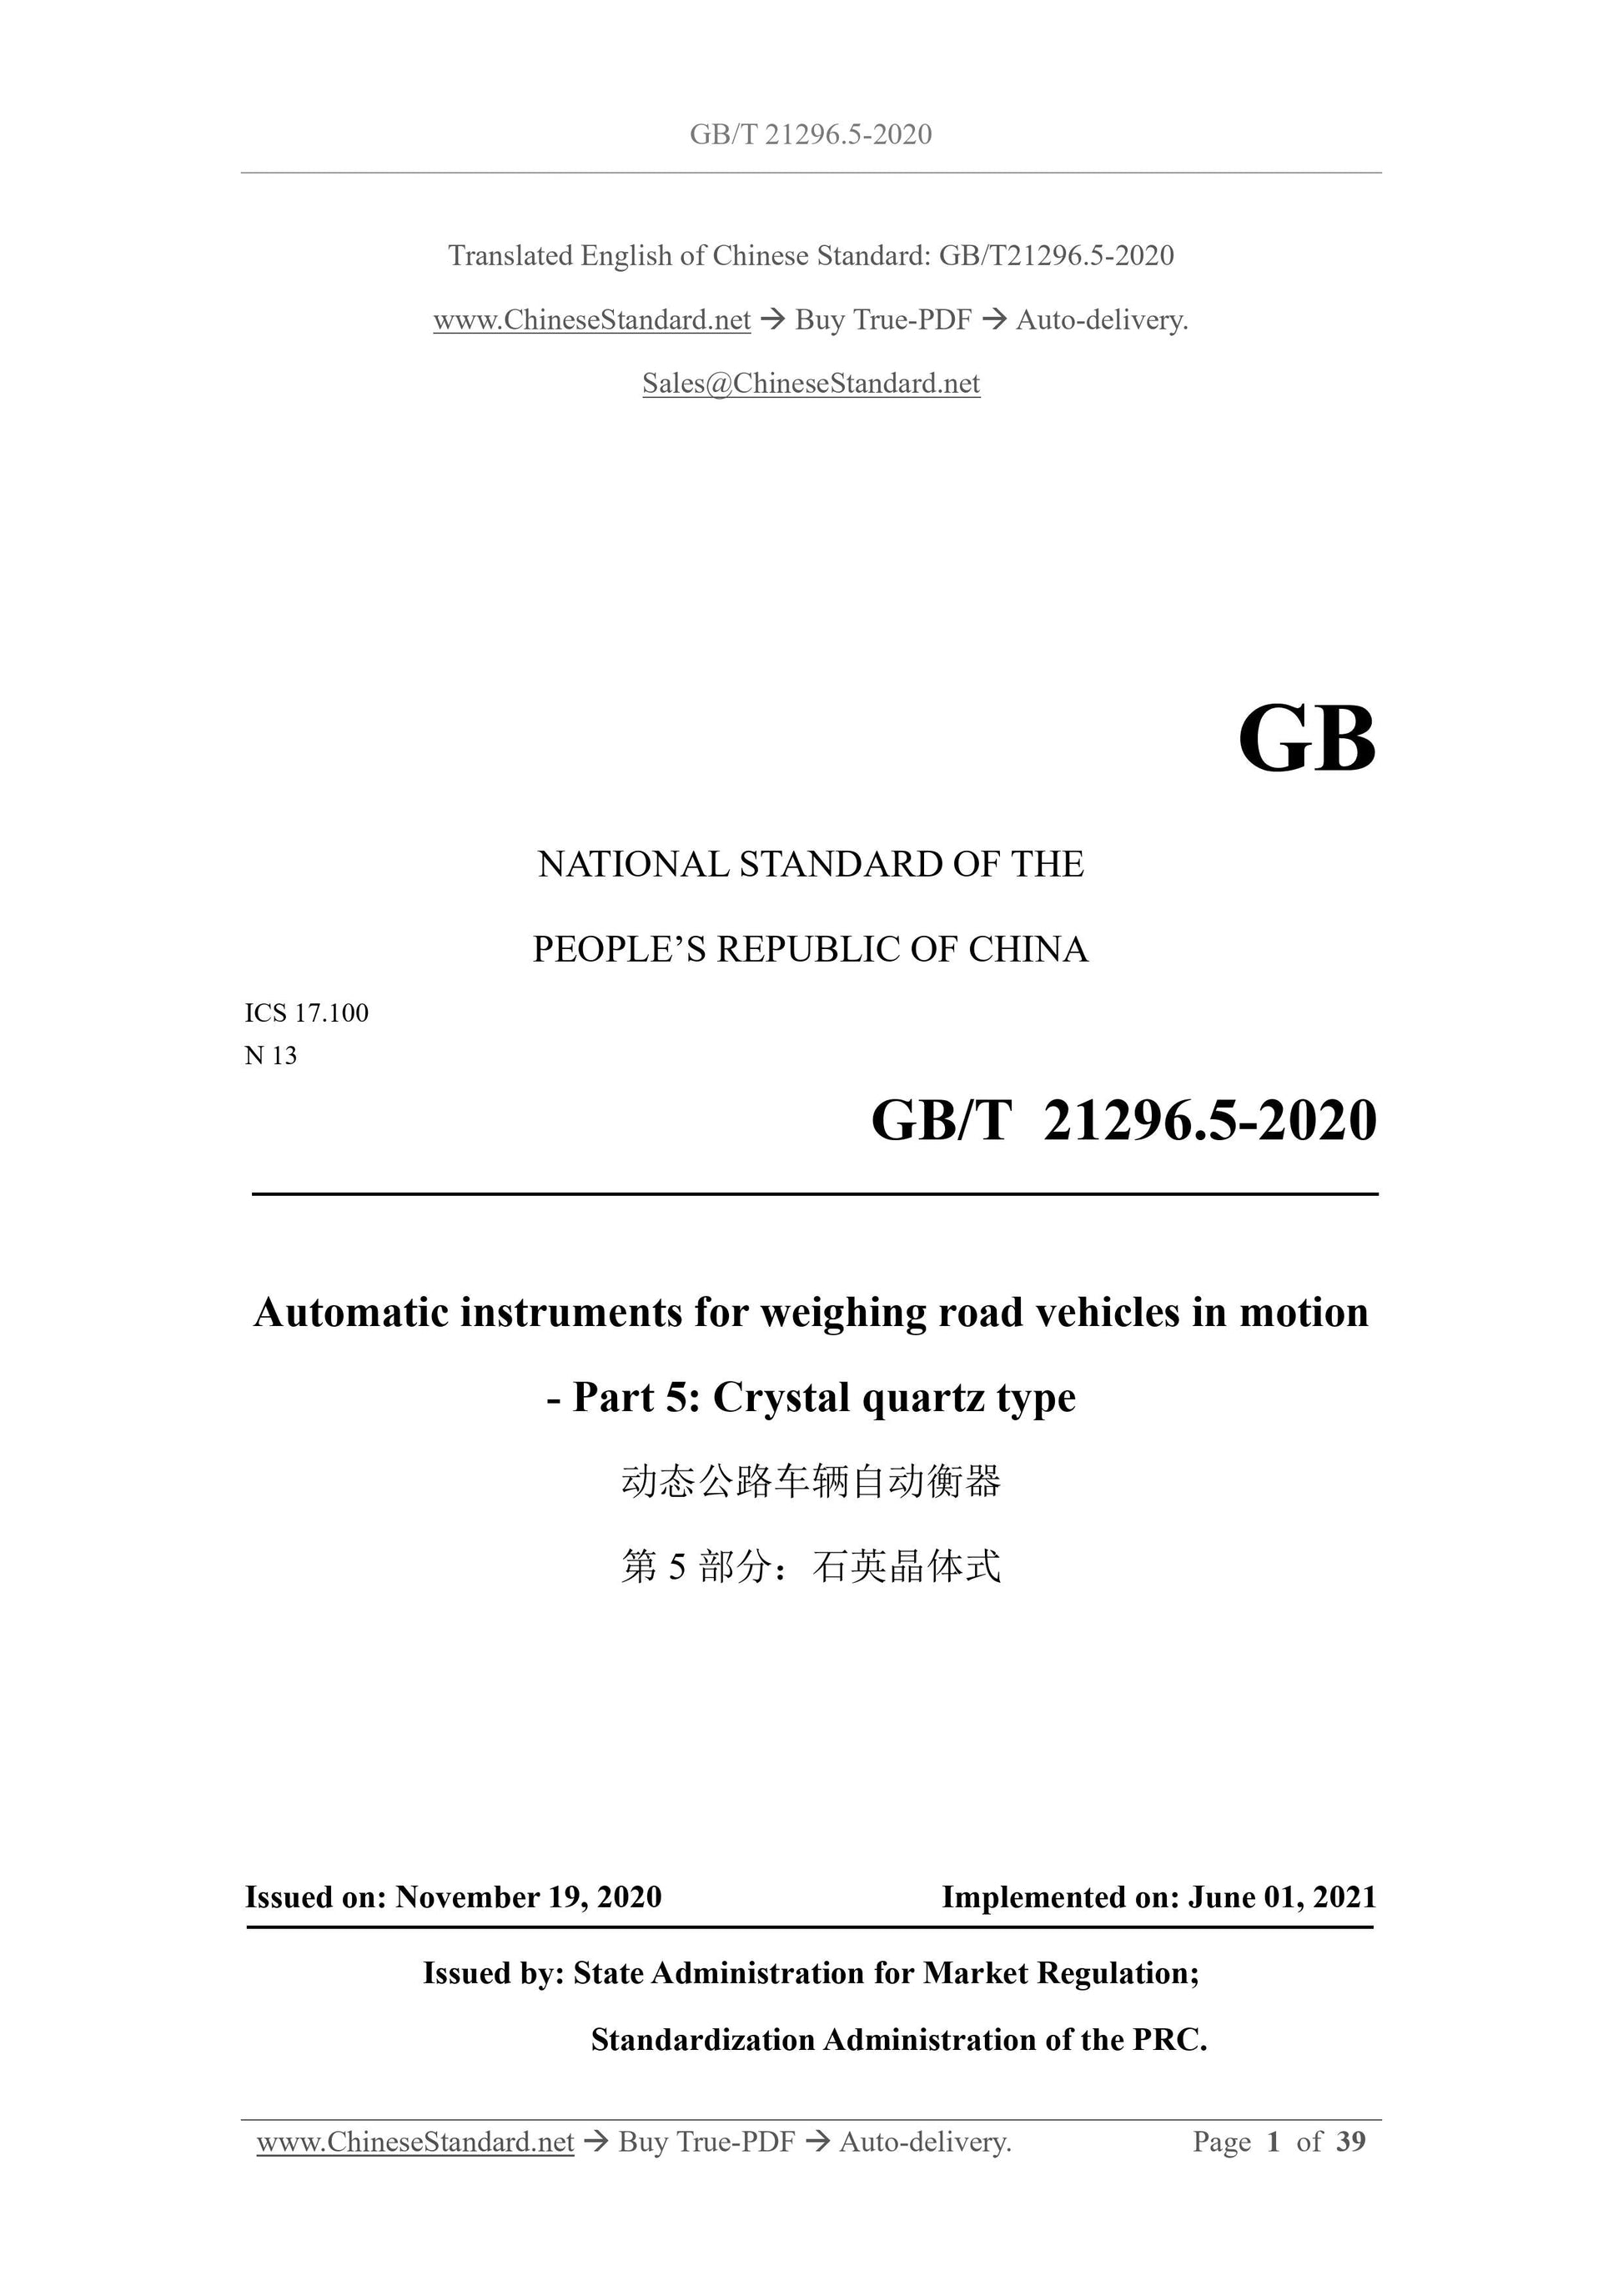 GB/T 21296.5-2020 Page 1